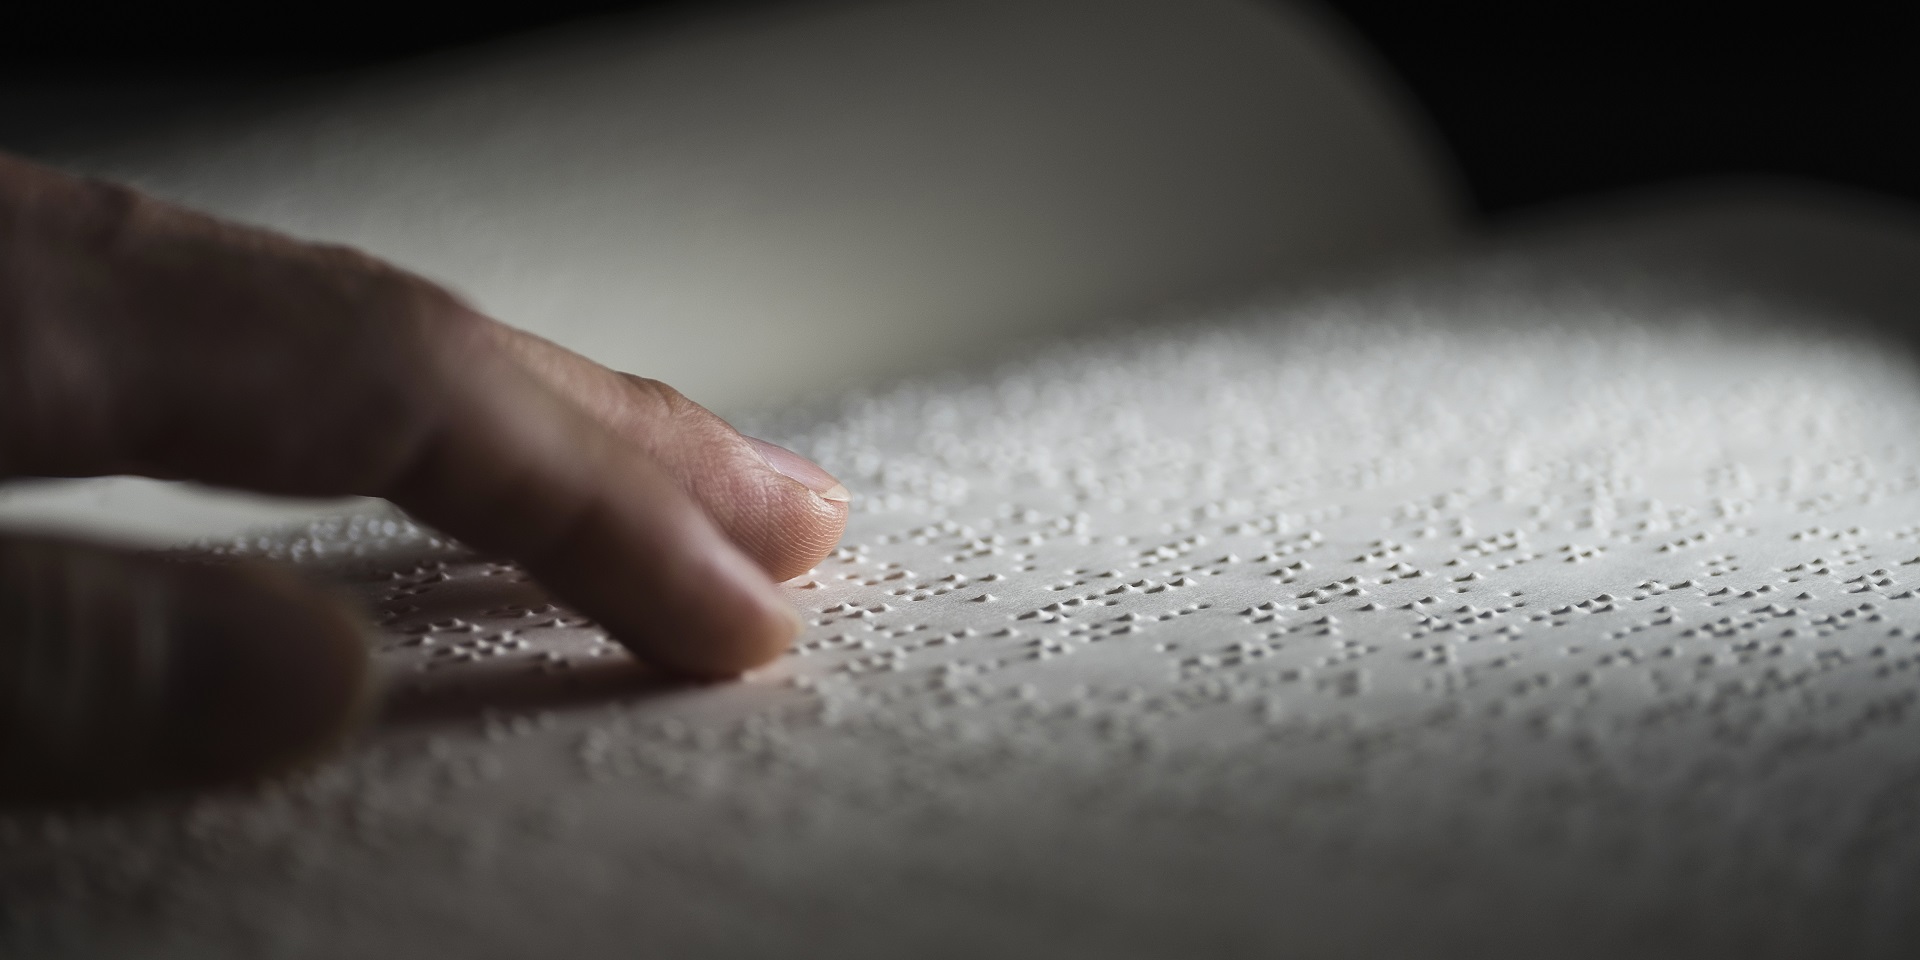 Louis Braille | The blind man who opened their eyes